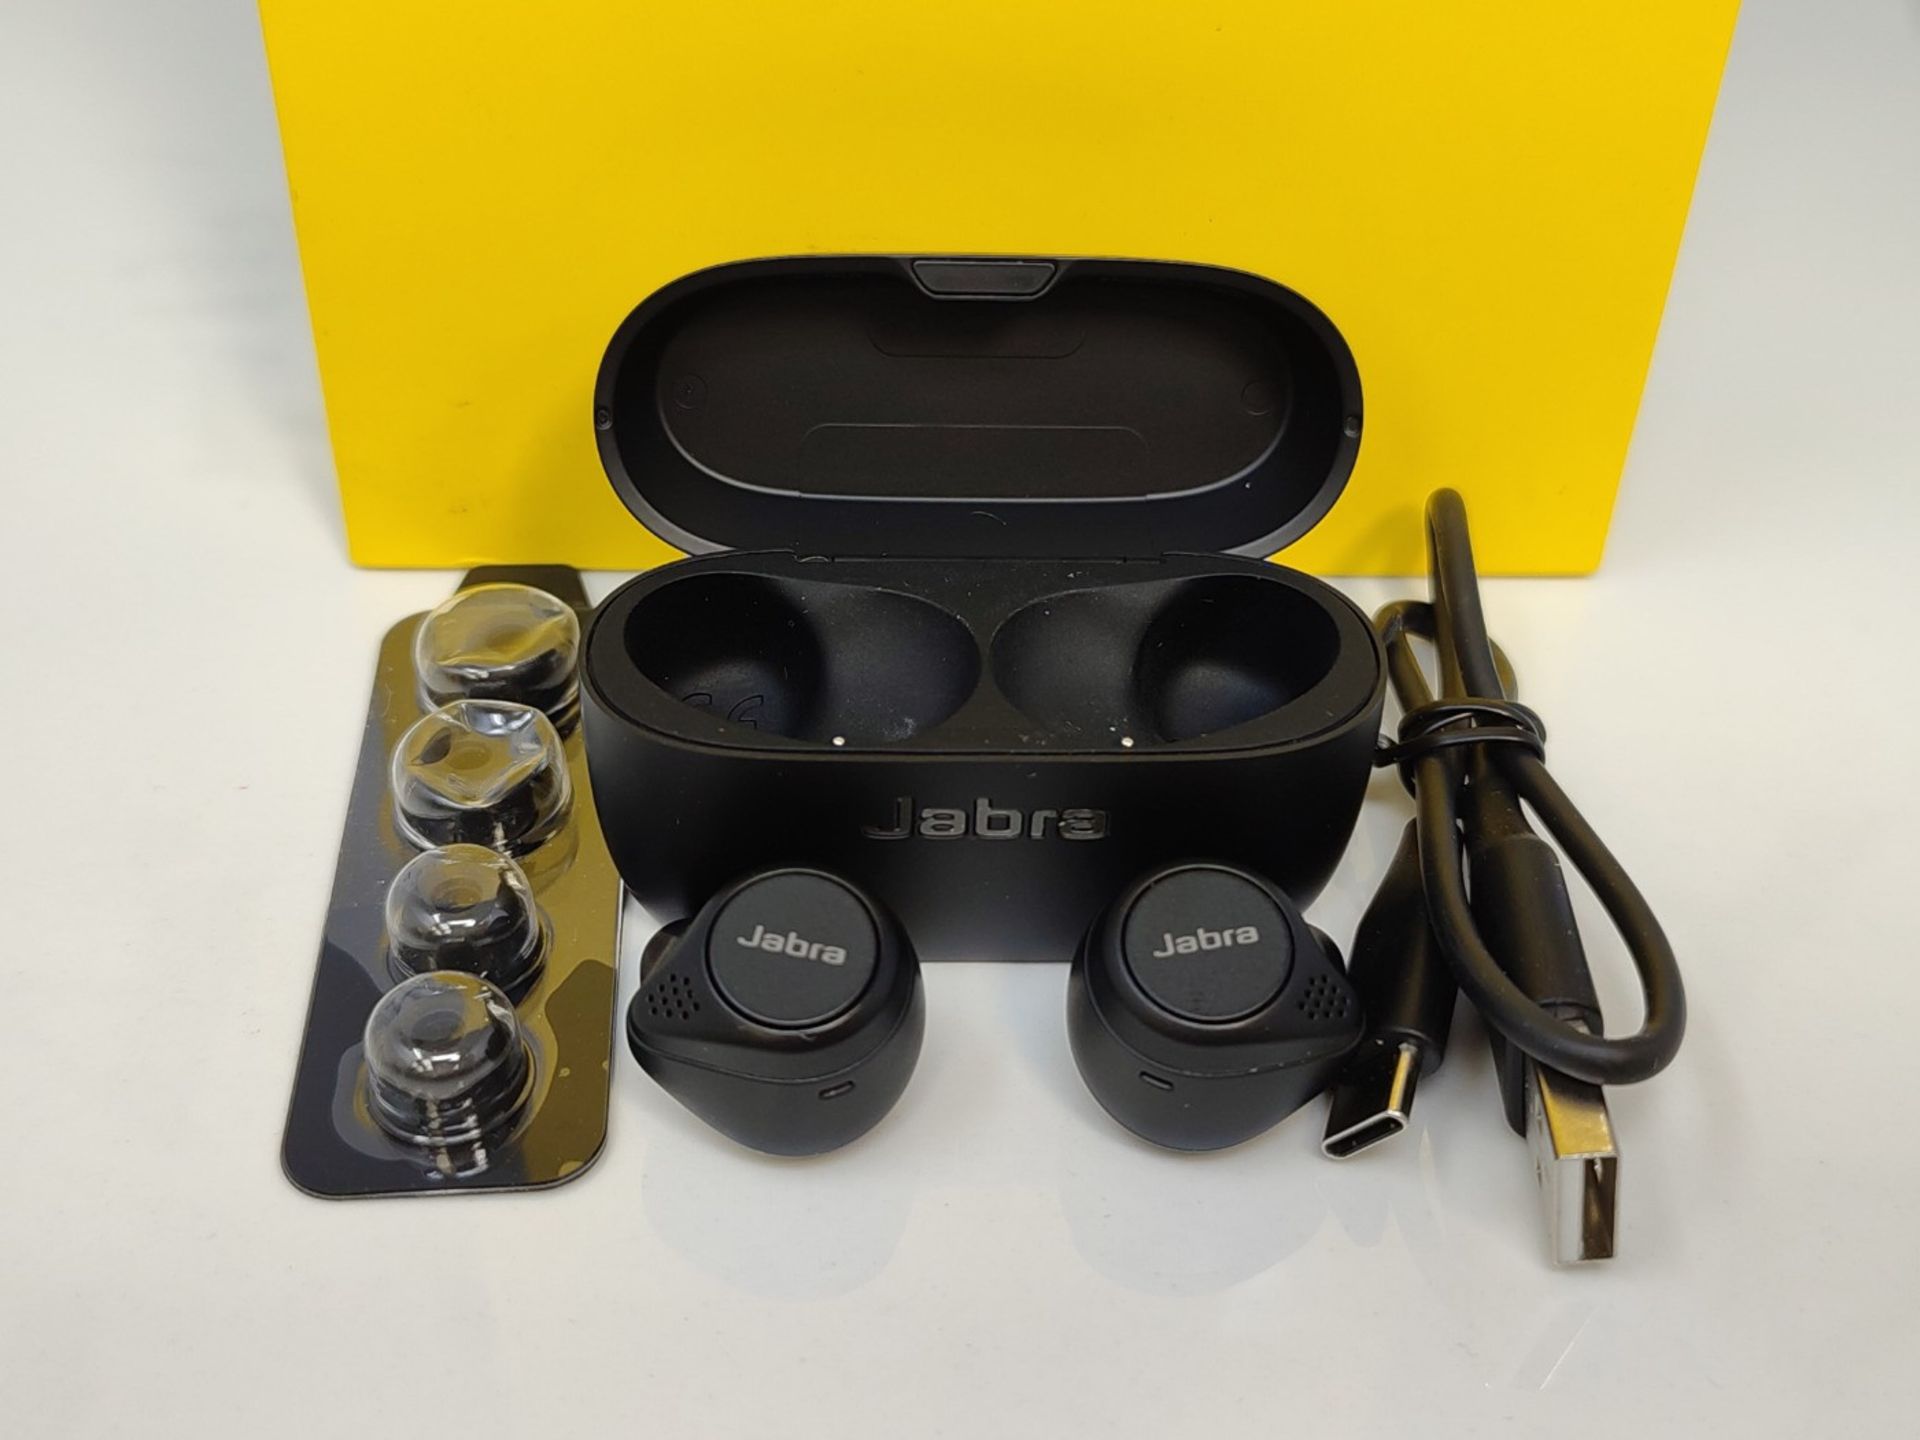 RRP £124.00 Jabra Elite 75t - In-ear Bluetooth headphones with active noise cancellation (ANC) and - Image 3 of 6